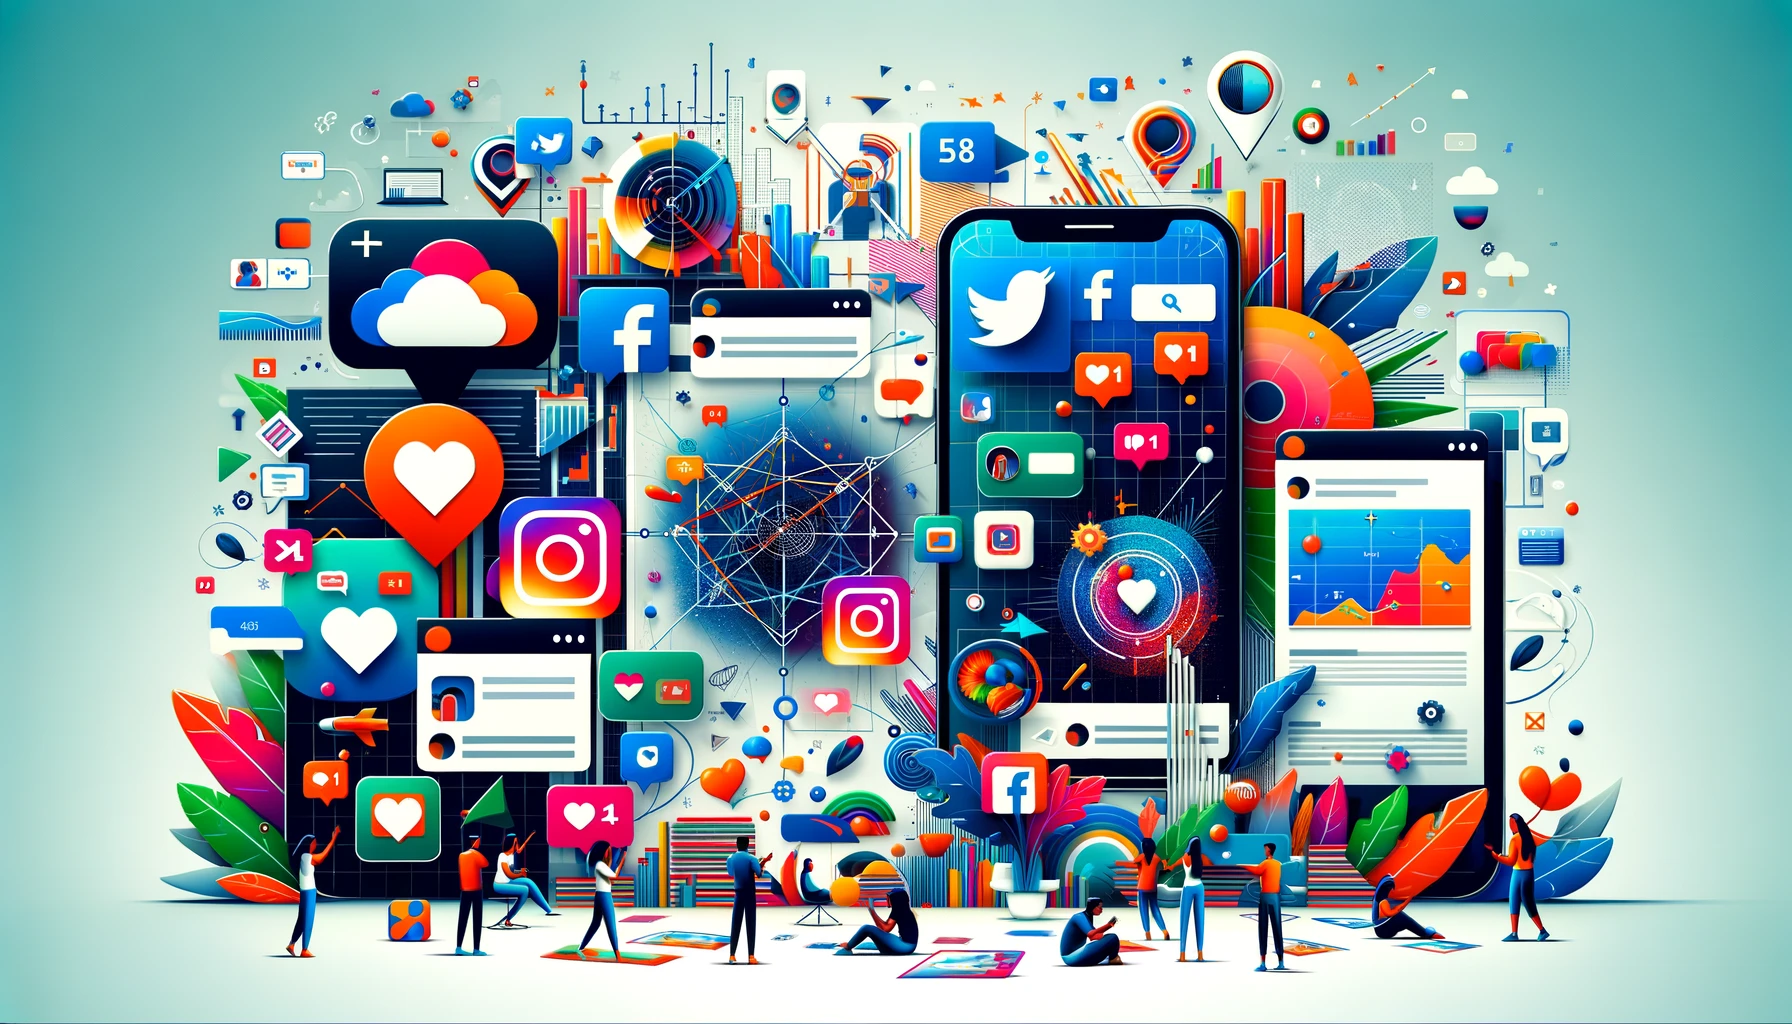 Dynamic representation of Instagram Ad Campaigns with various ad types and audience interaction, symbolizing targeted and creative advertising strategies.